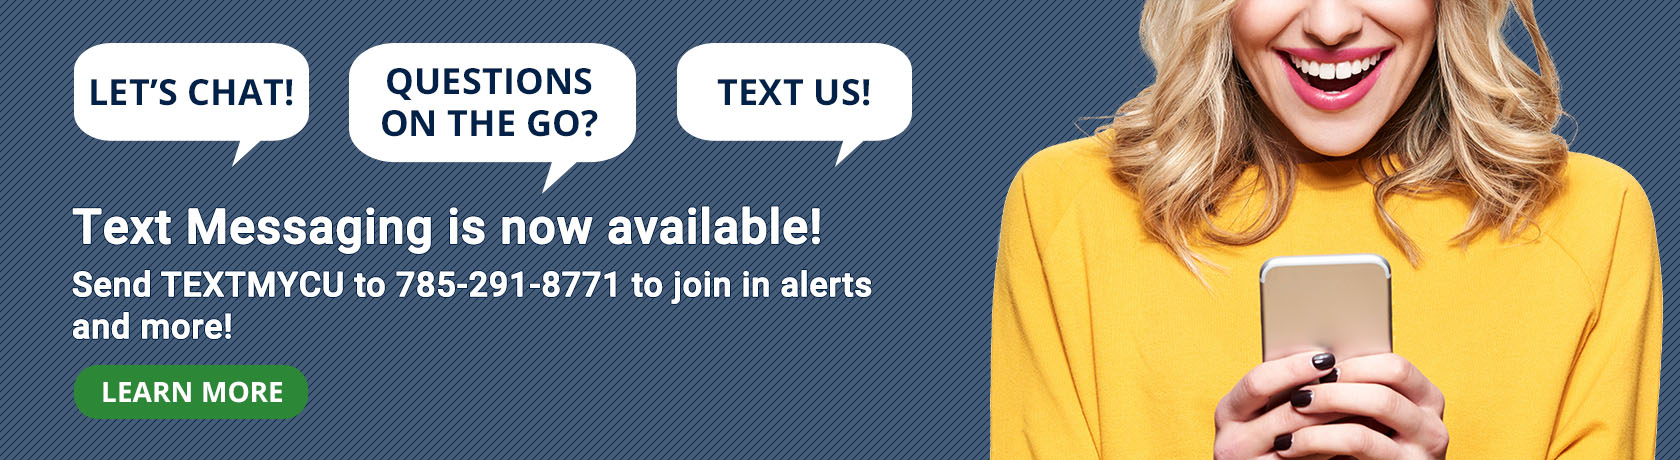 Text Messaging is Now Available.  Send TEXTMYCU to 74994 to join in alerts and more.  Learn More.